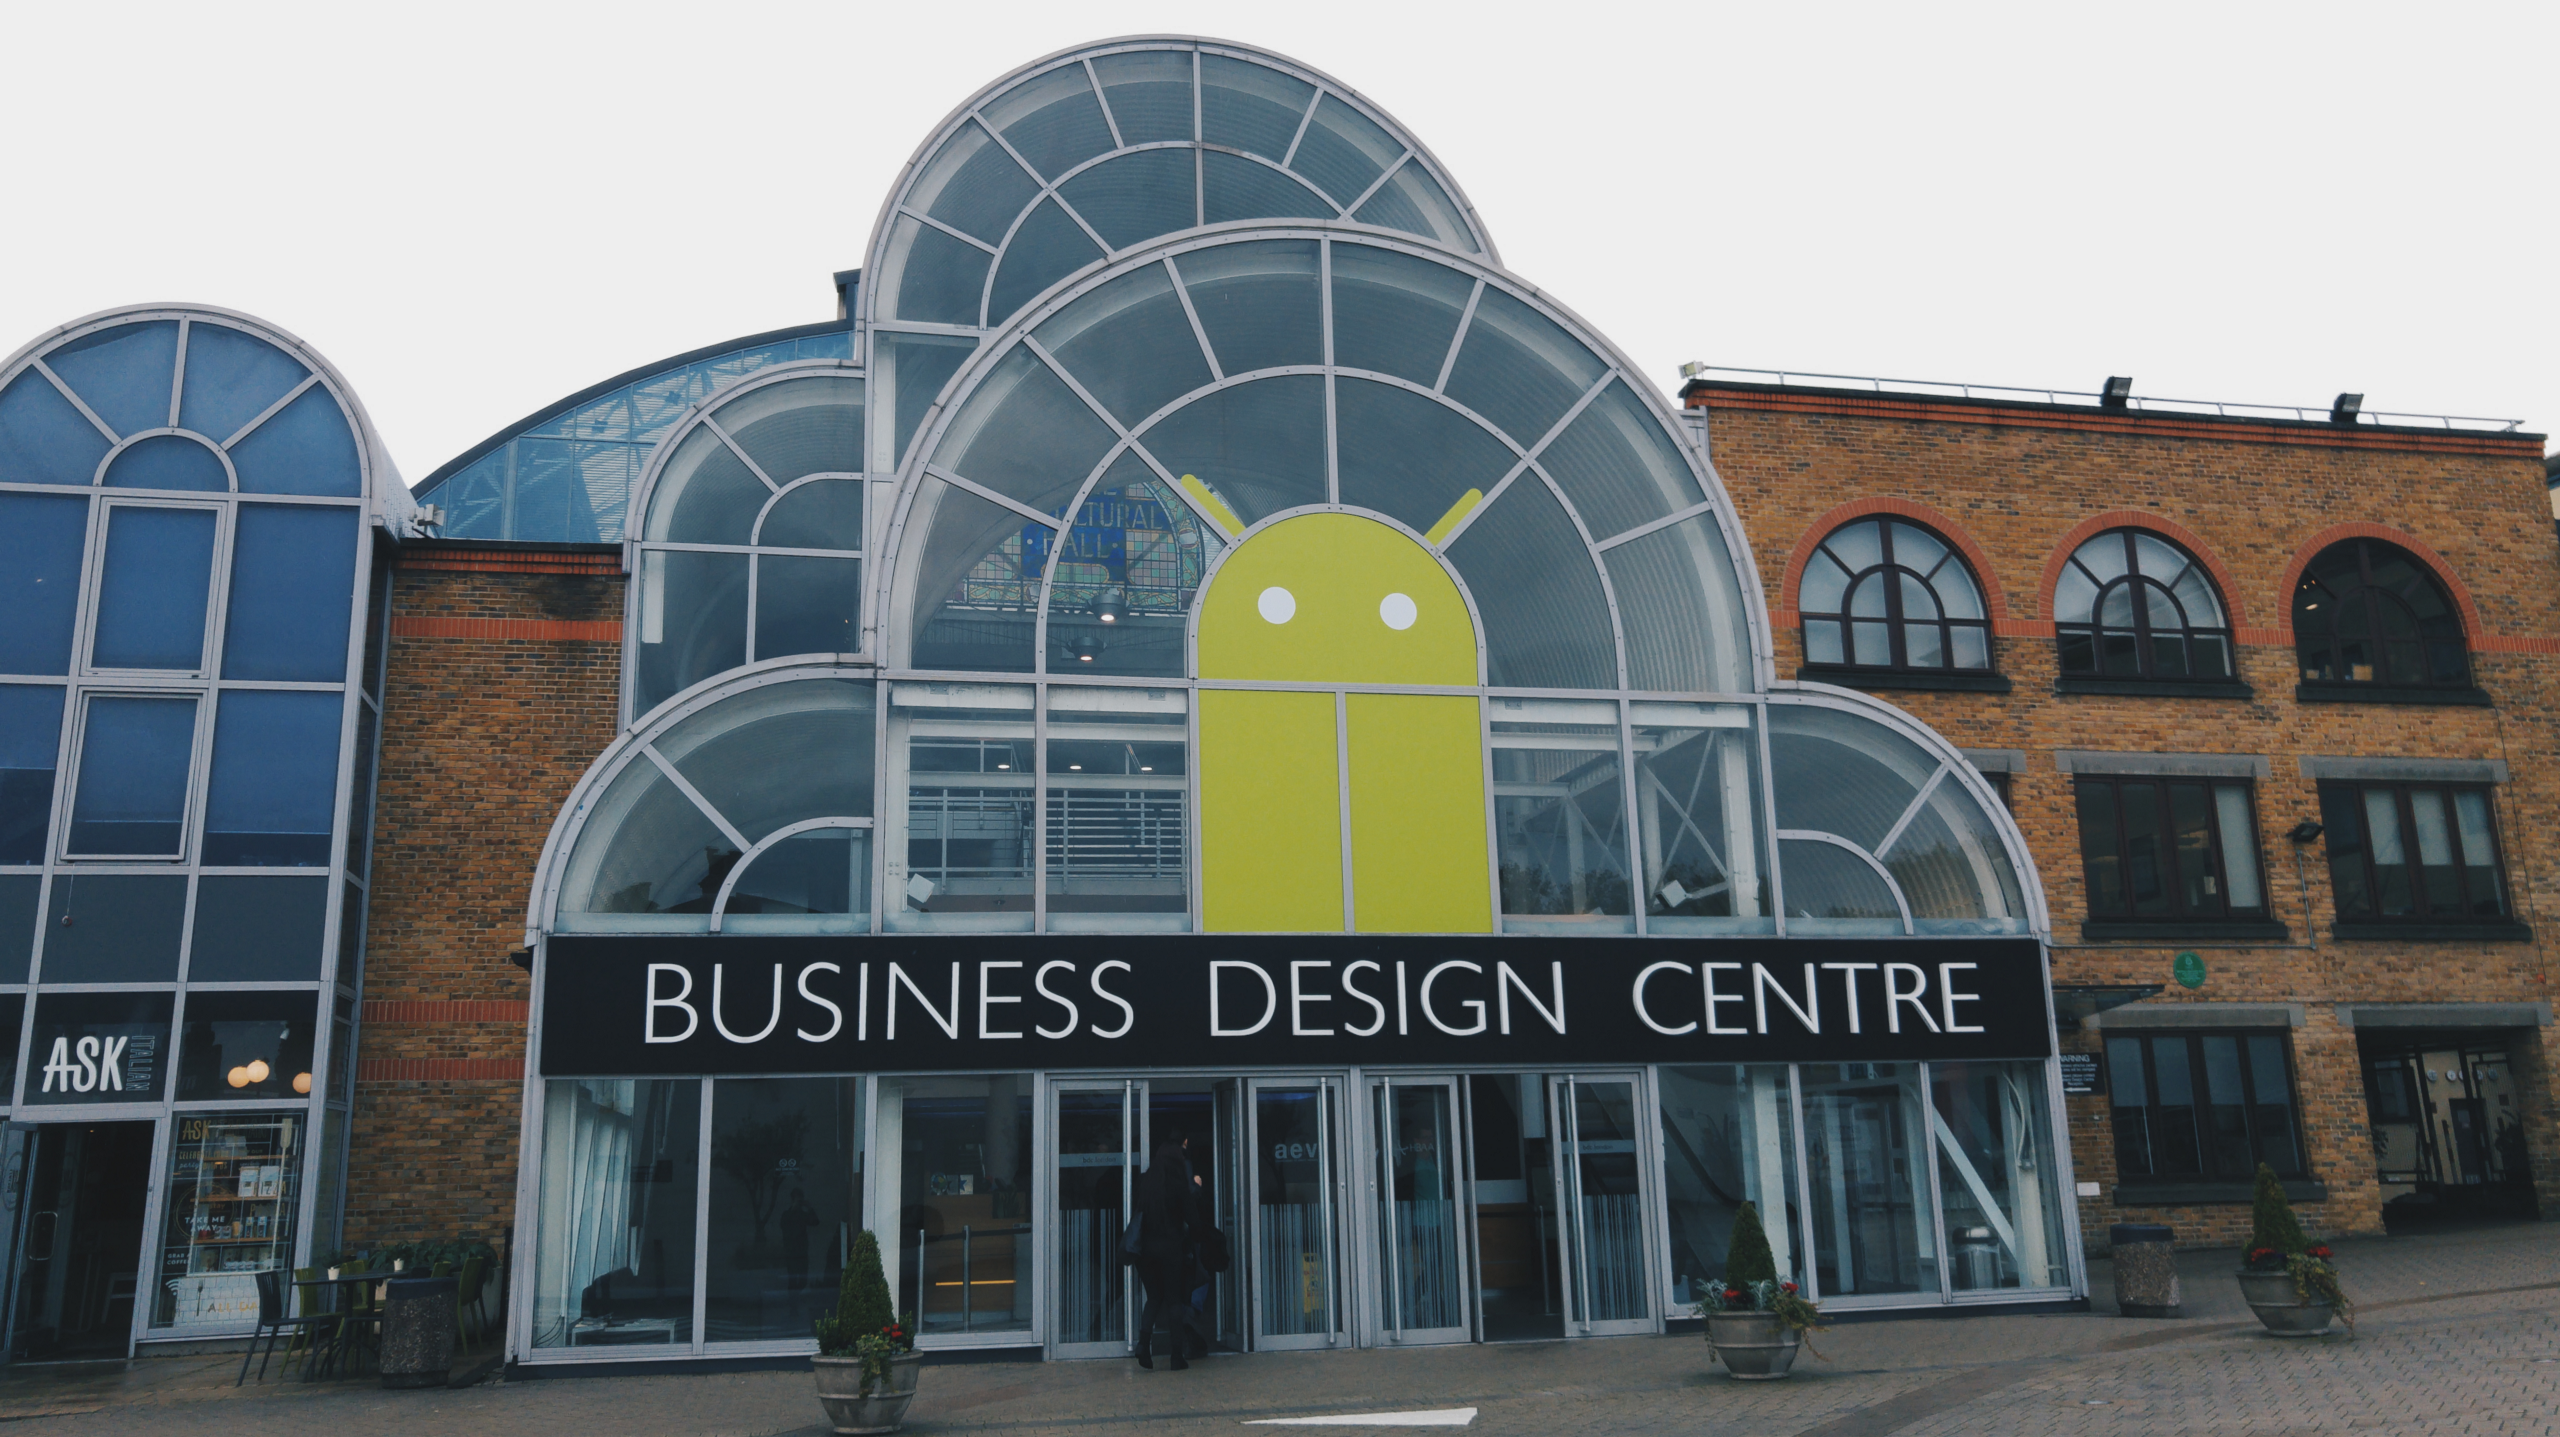 Things I did at Droidcon London